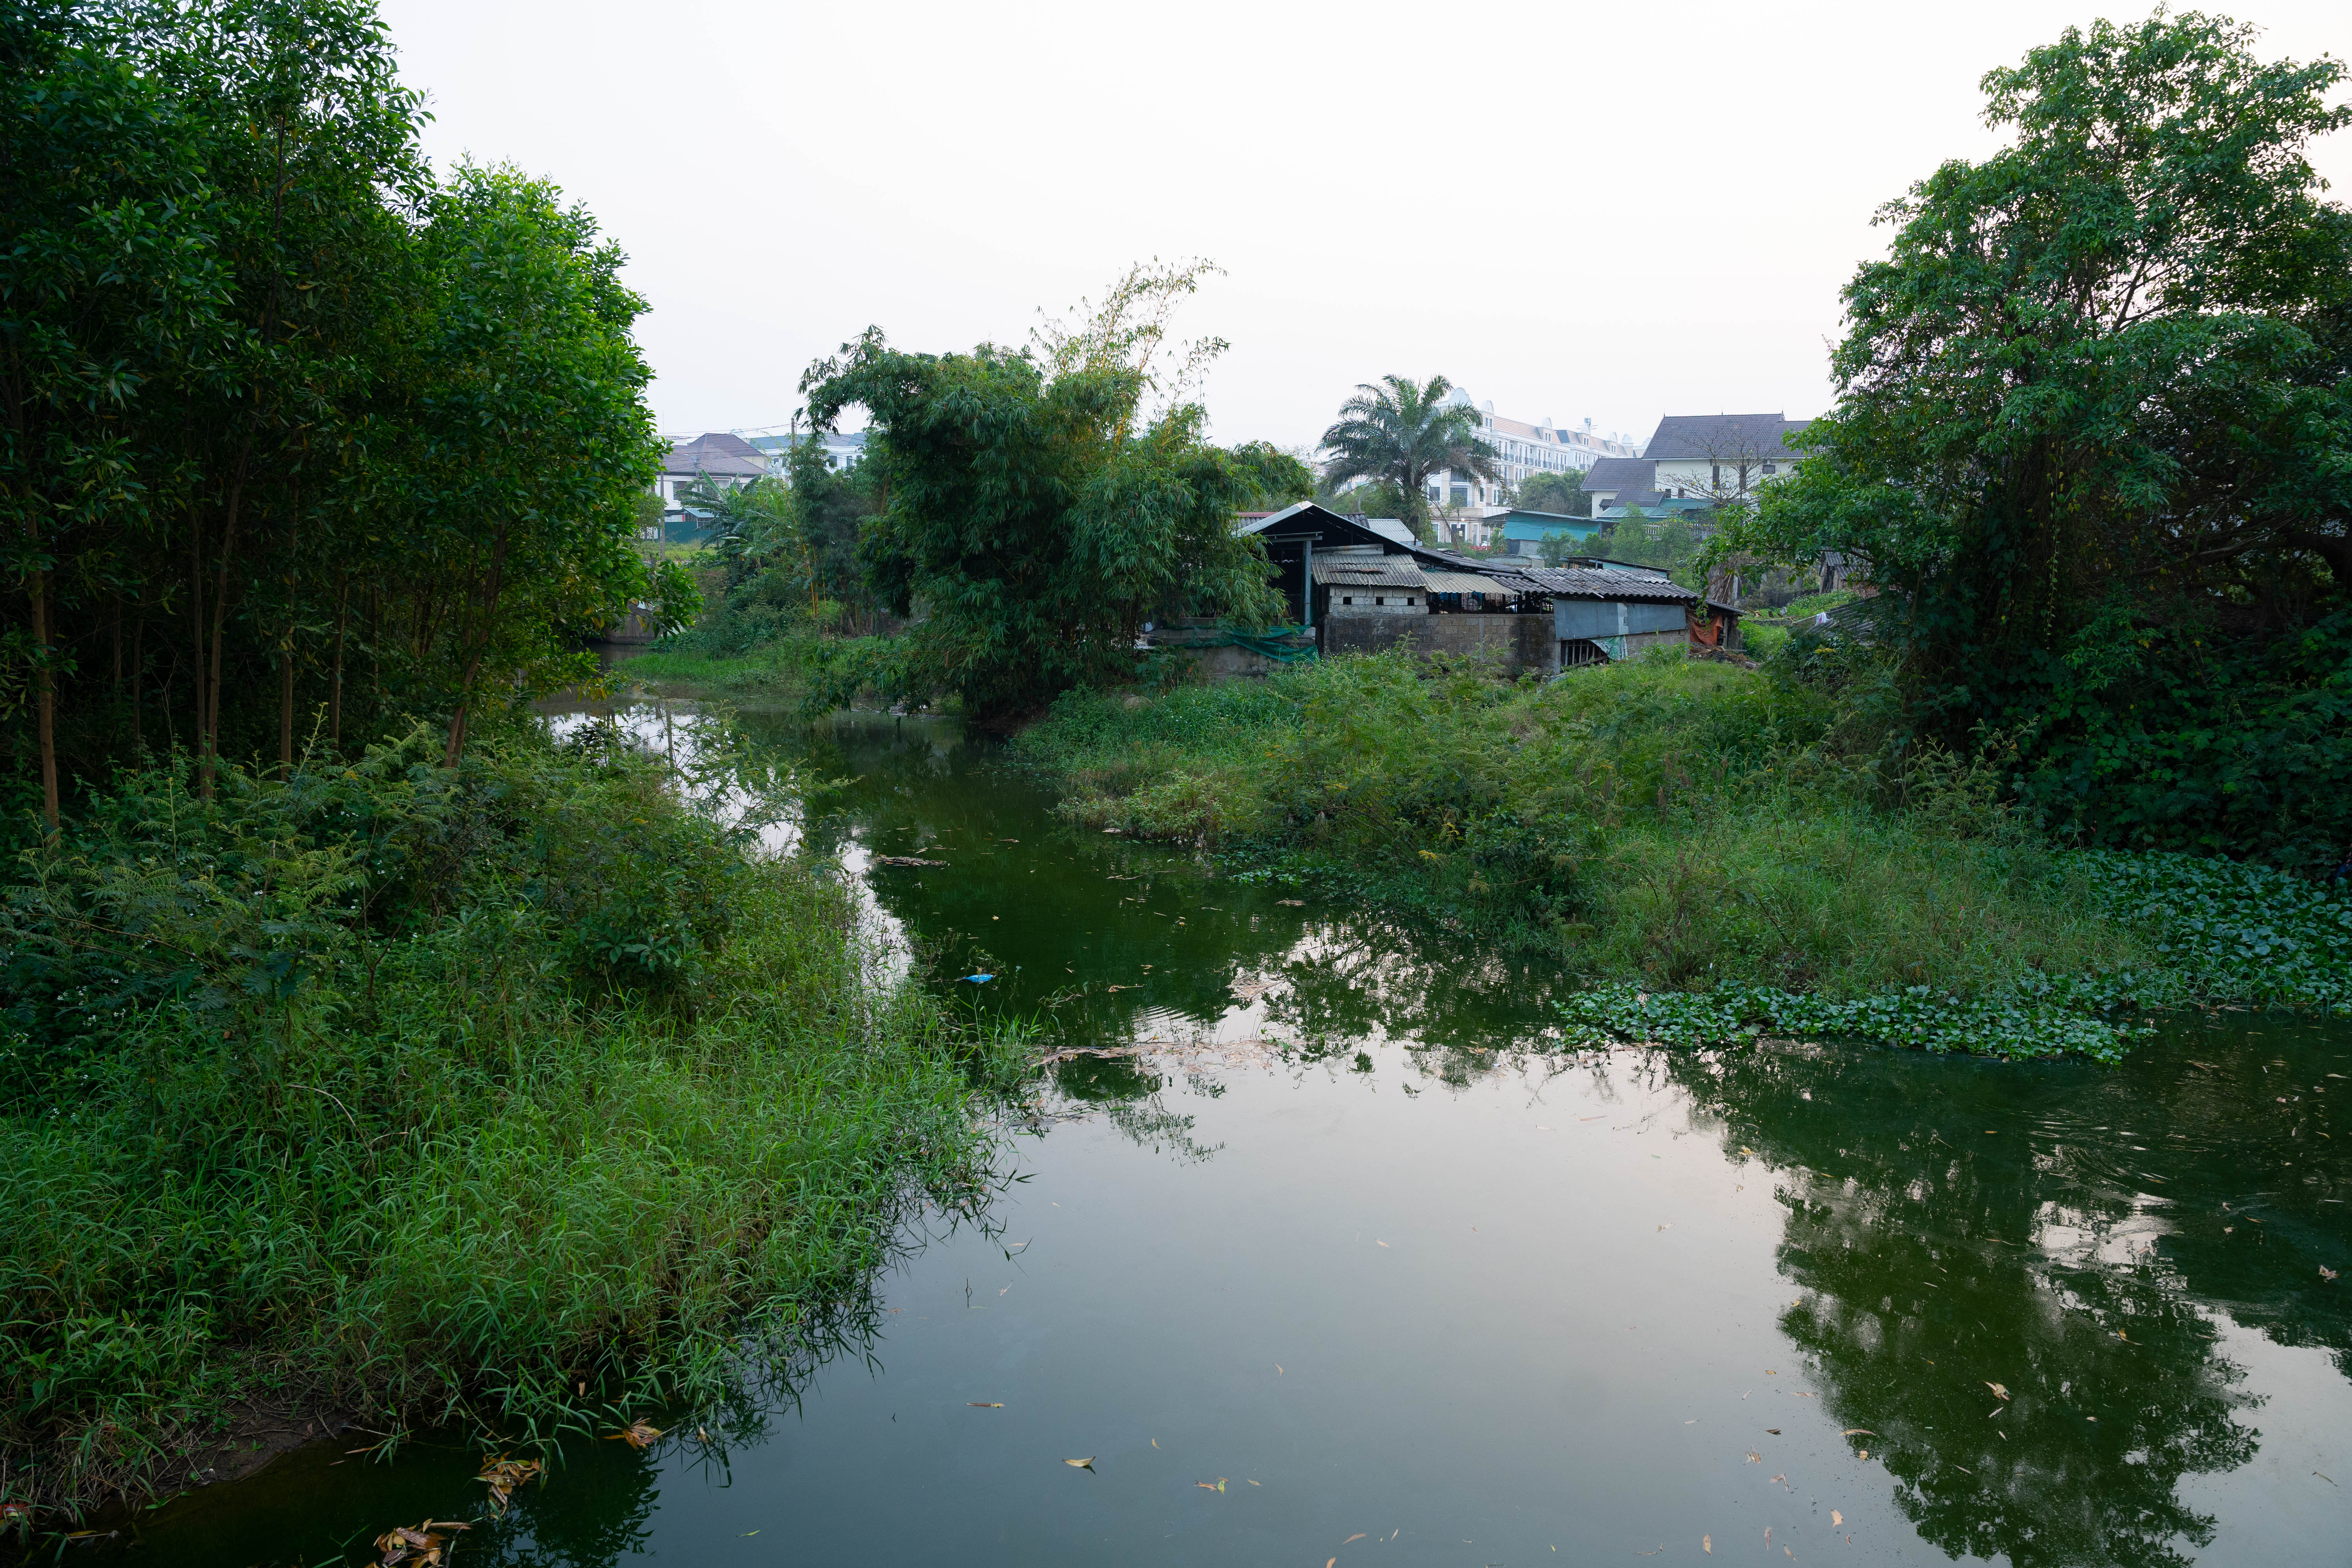 "In Quang Tri, specifically in Dong Ha city, the project aims to promote green urban development."